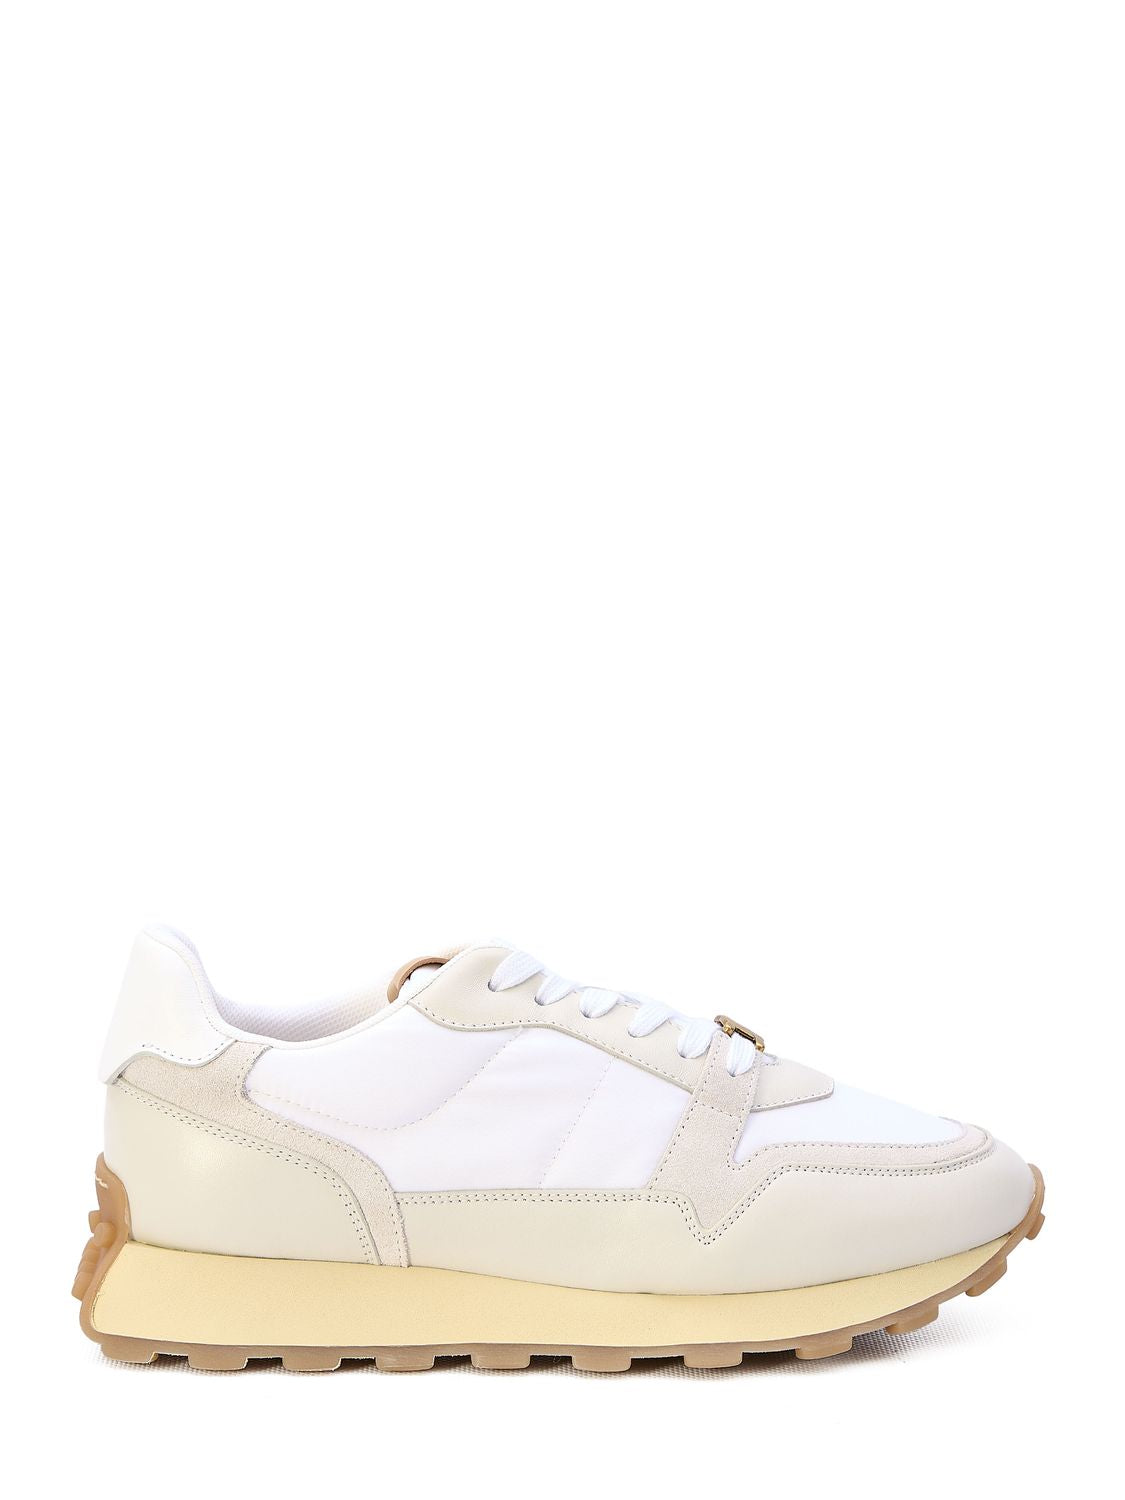 TOD'S Beige and White Leather and Fabric Sneakers for Women - SS24